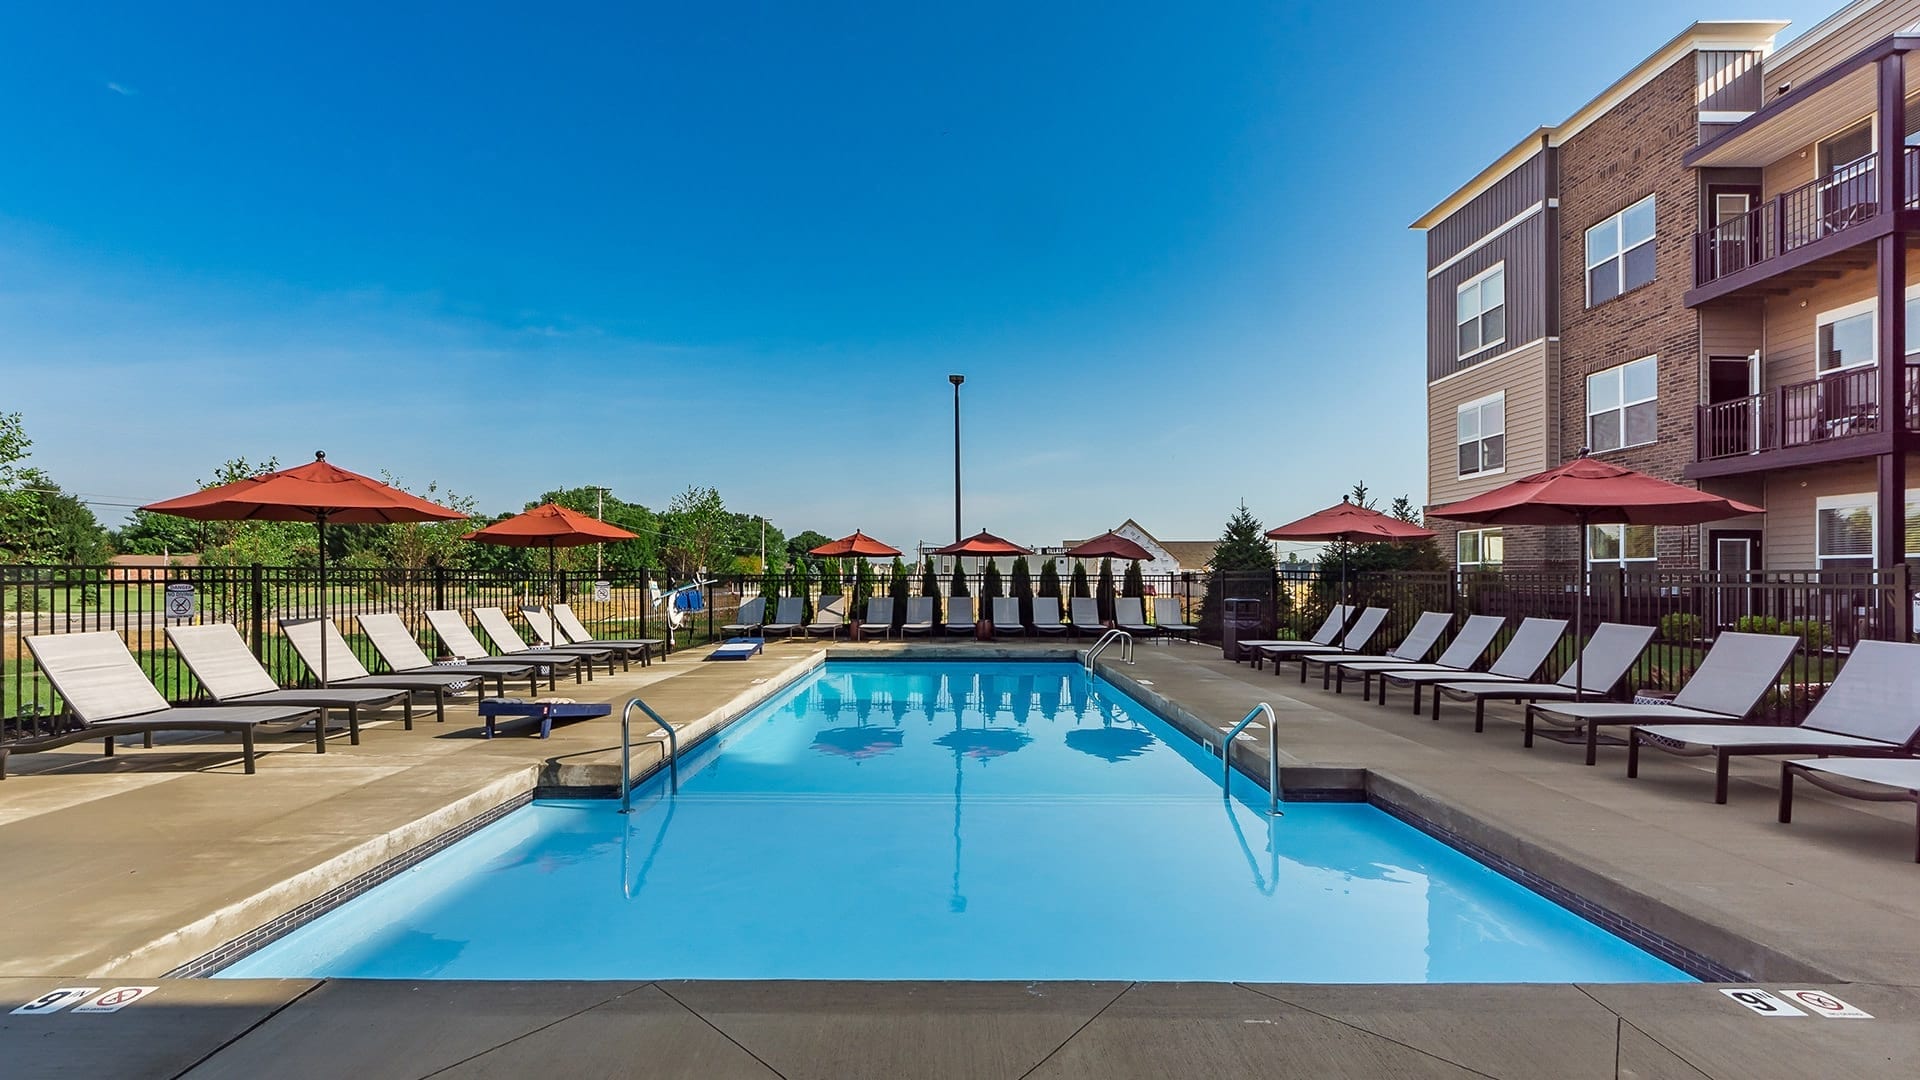 View of the Pool During the Day at Our Modern Apartments in Dublin, Ohio